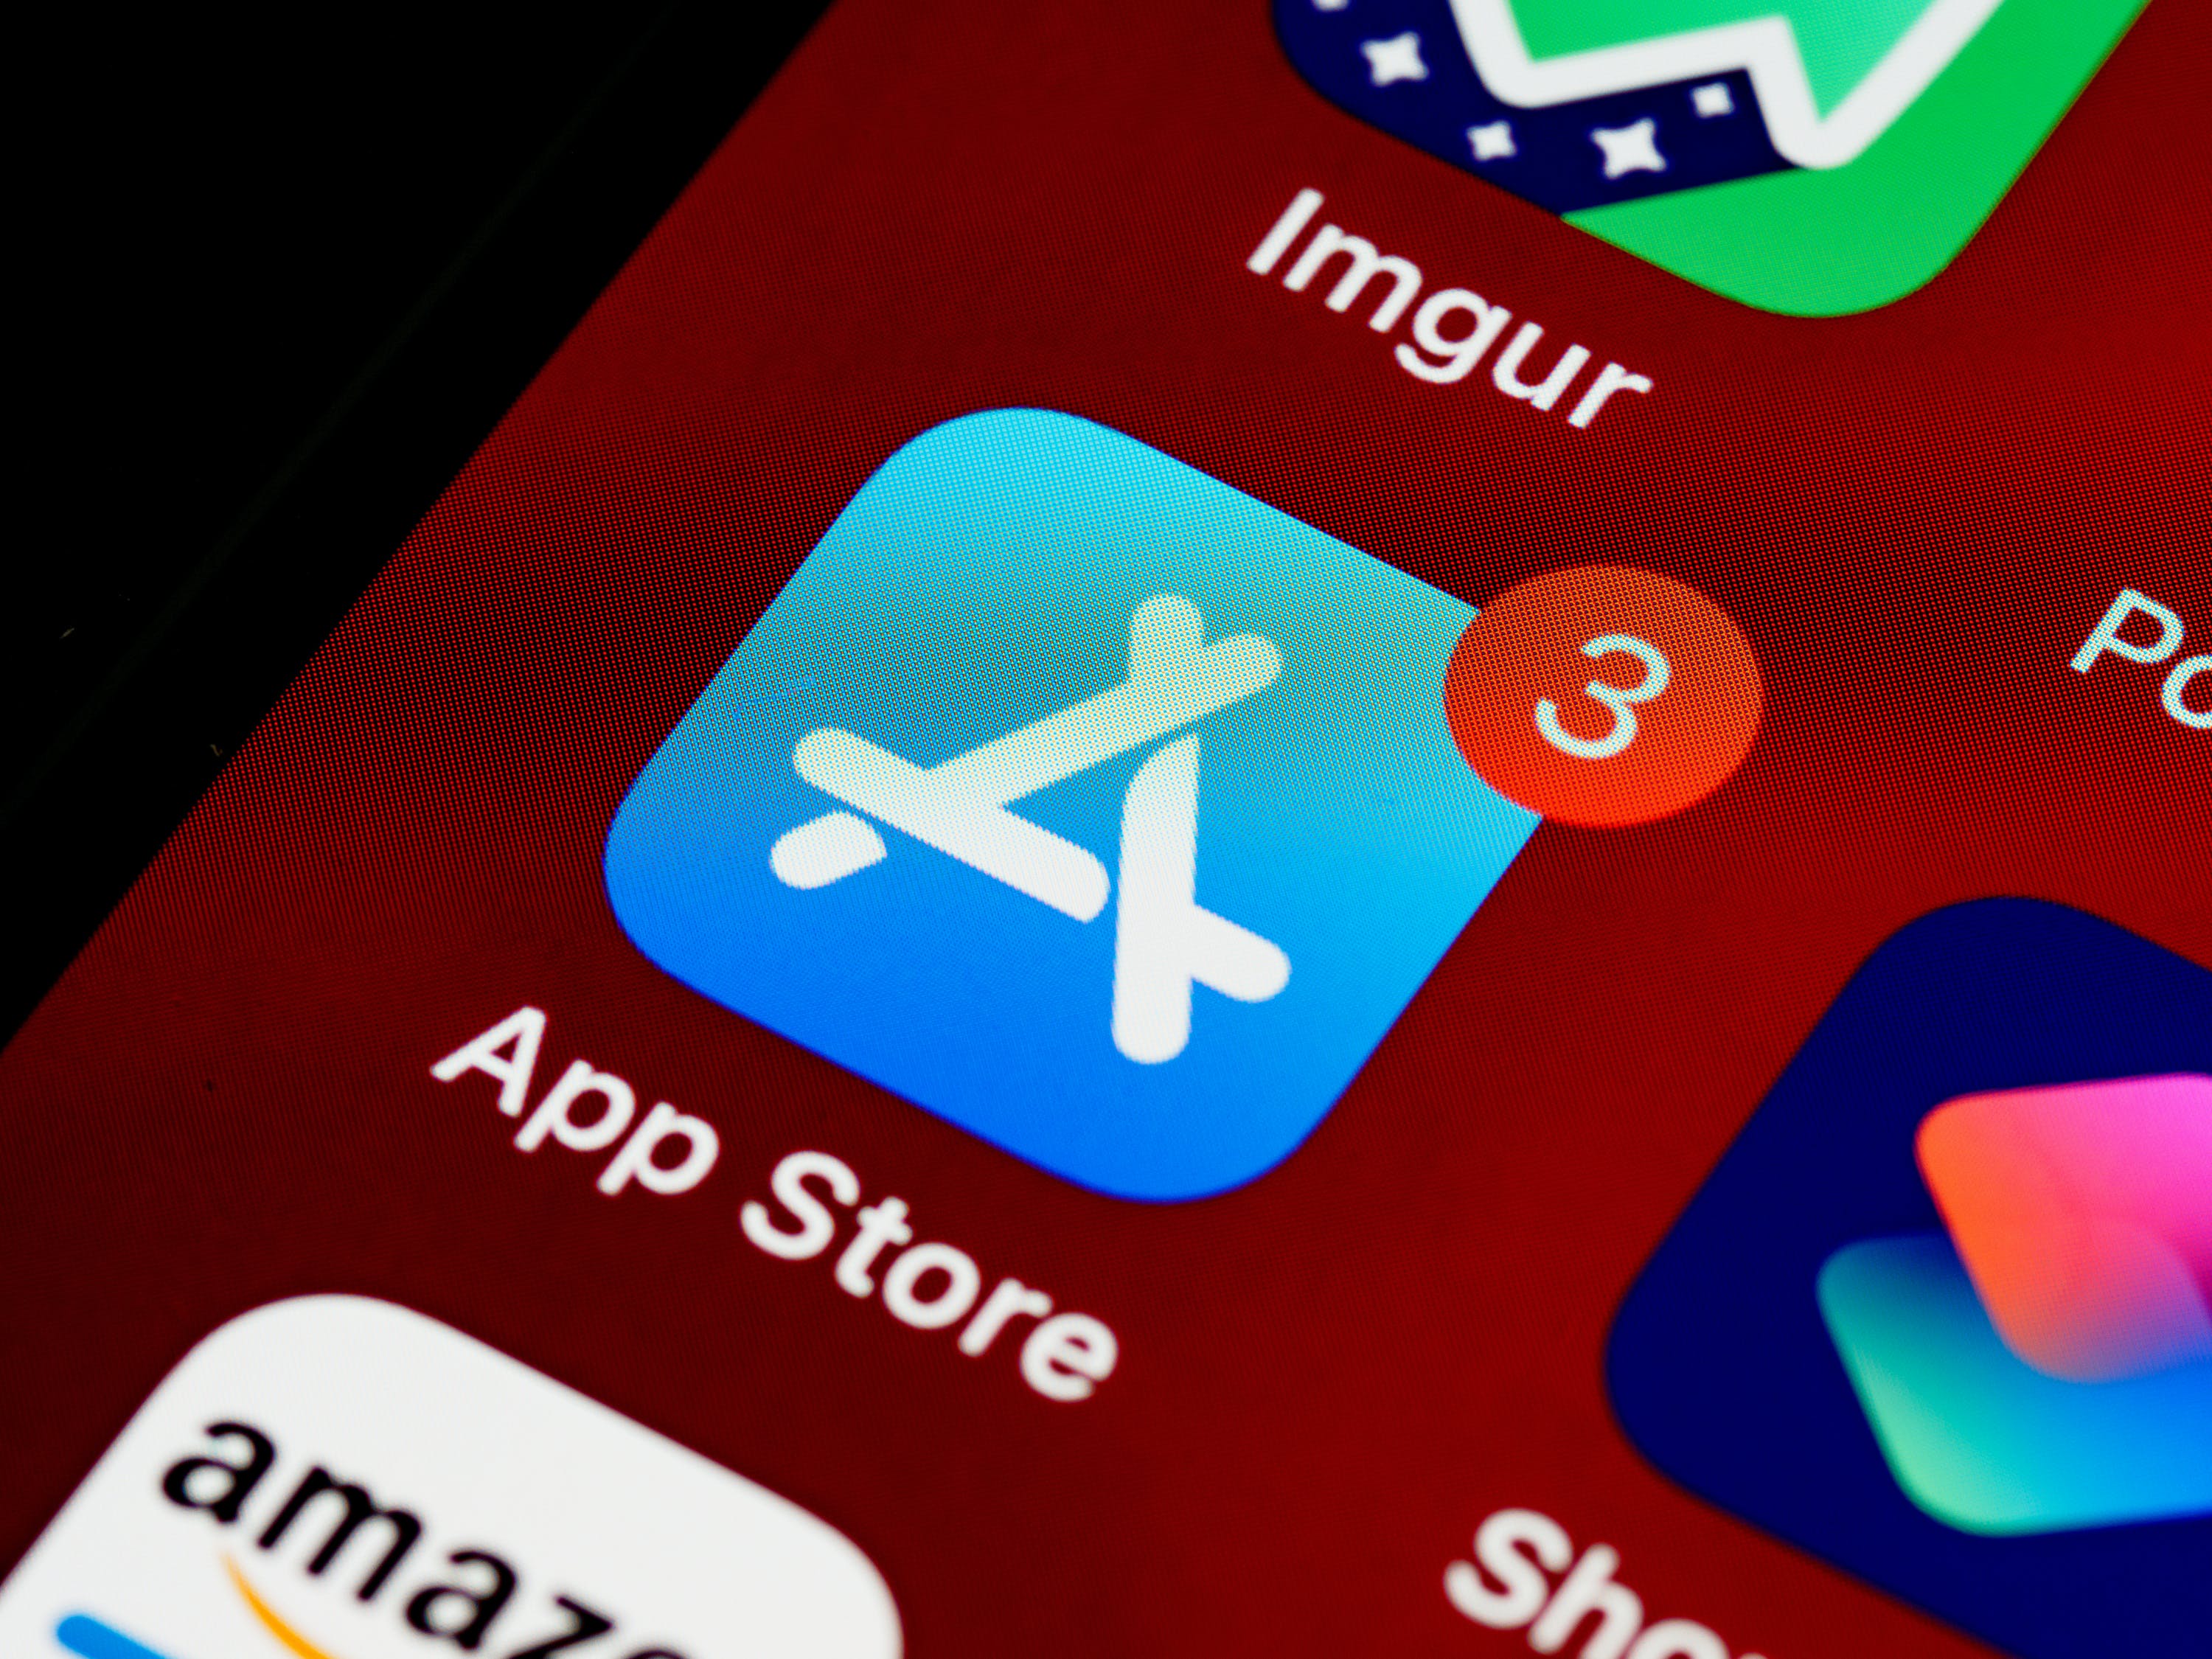 Apple App Store faces some security issues which might cost them their loyal audience